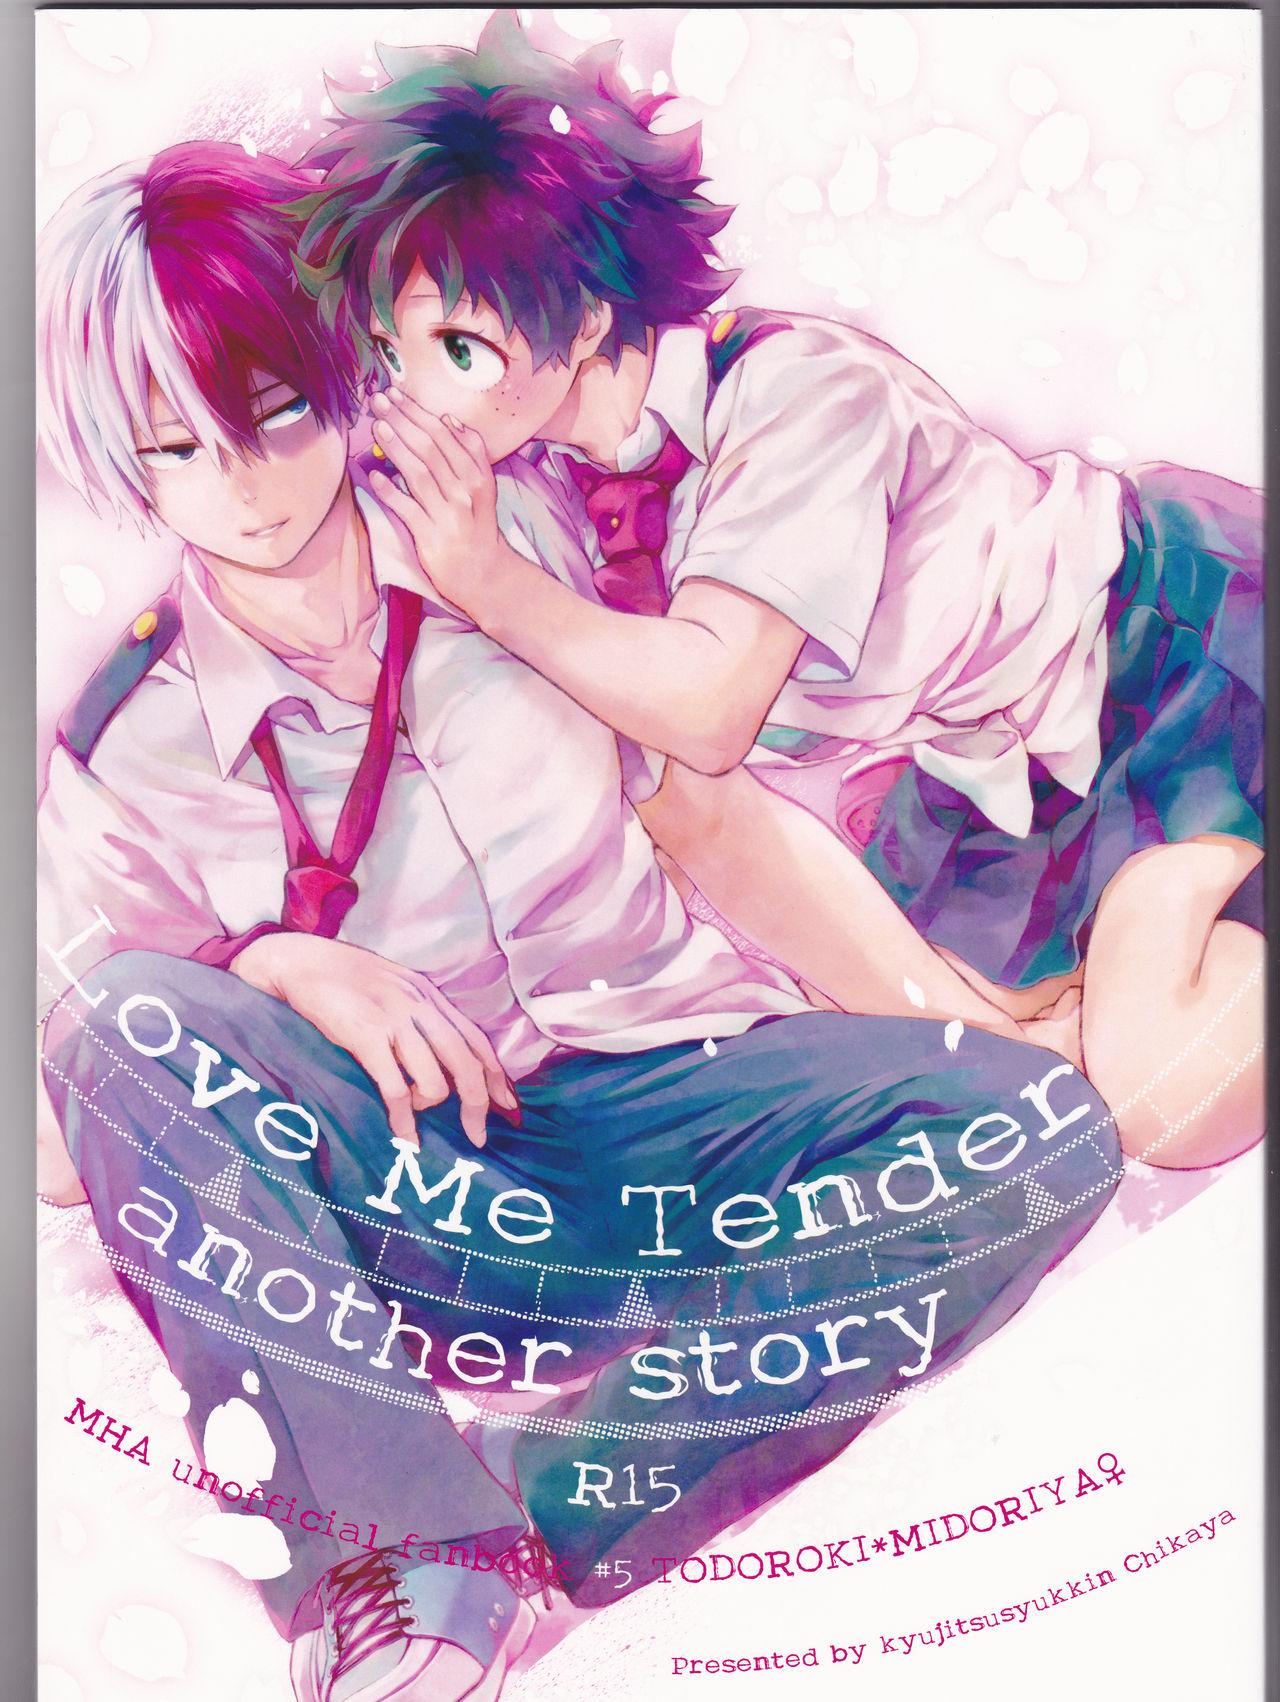 Full Movie Love Me Tender another story - My hero academia Dominant - Page 1